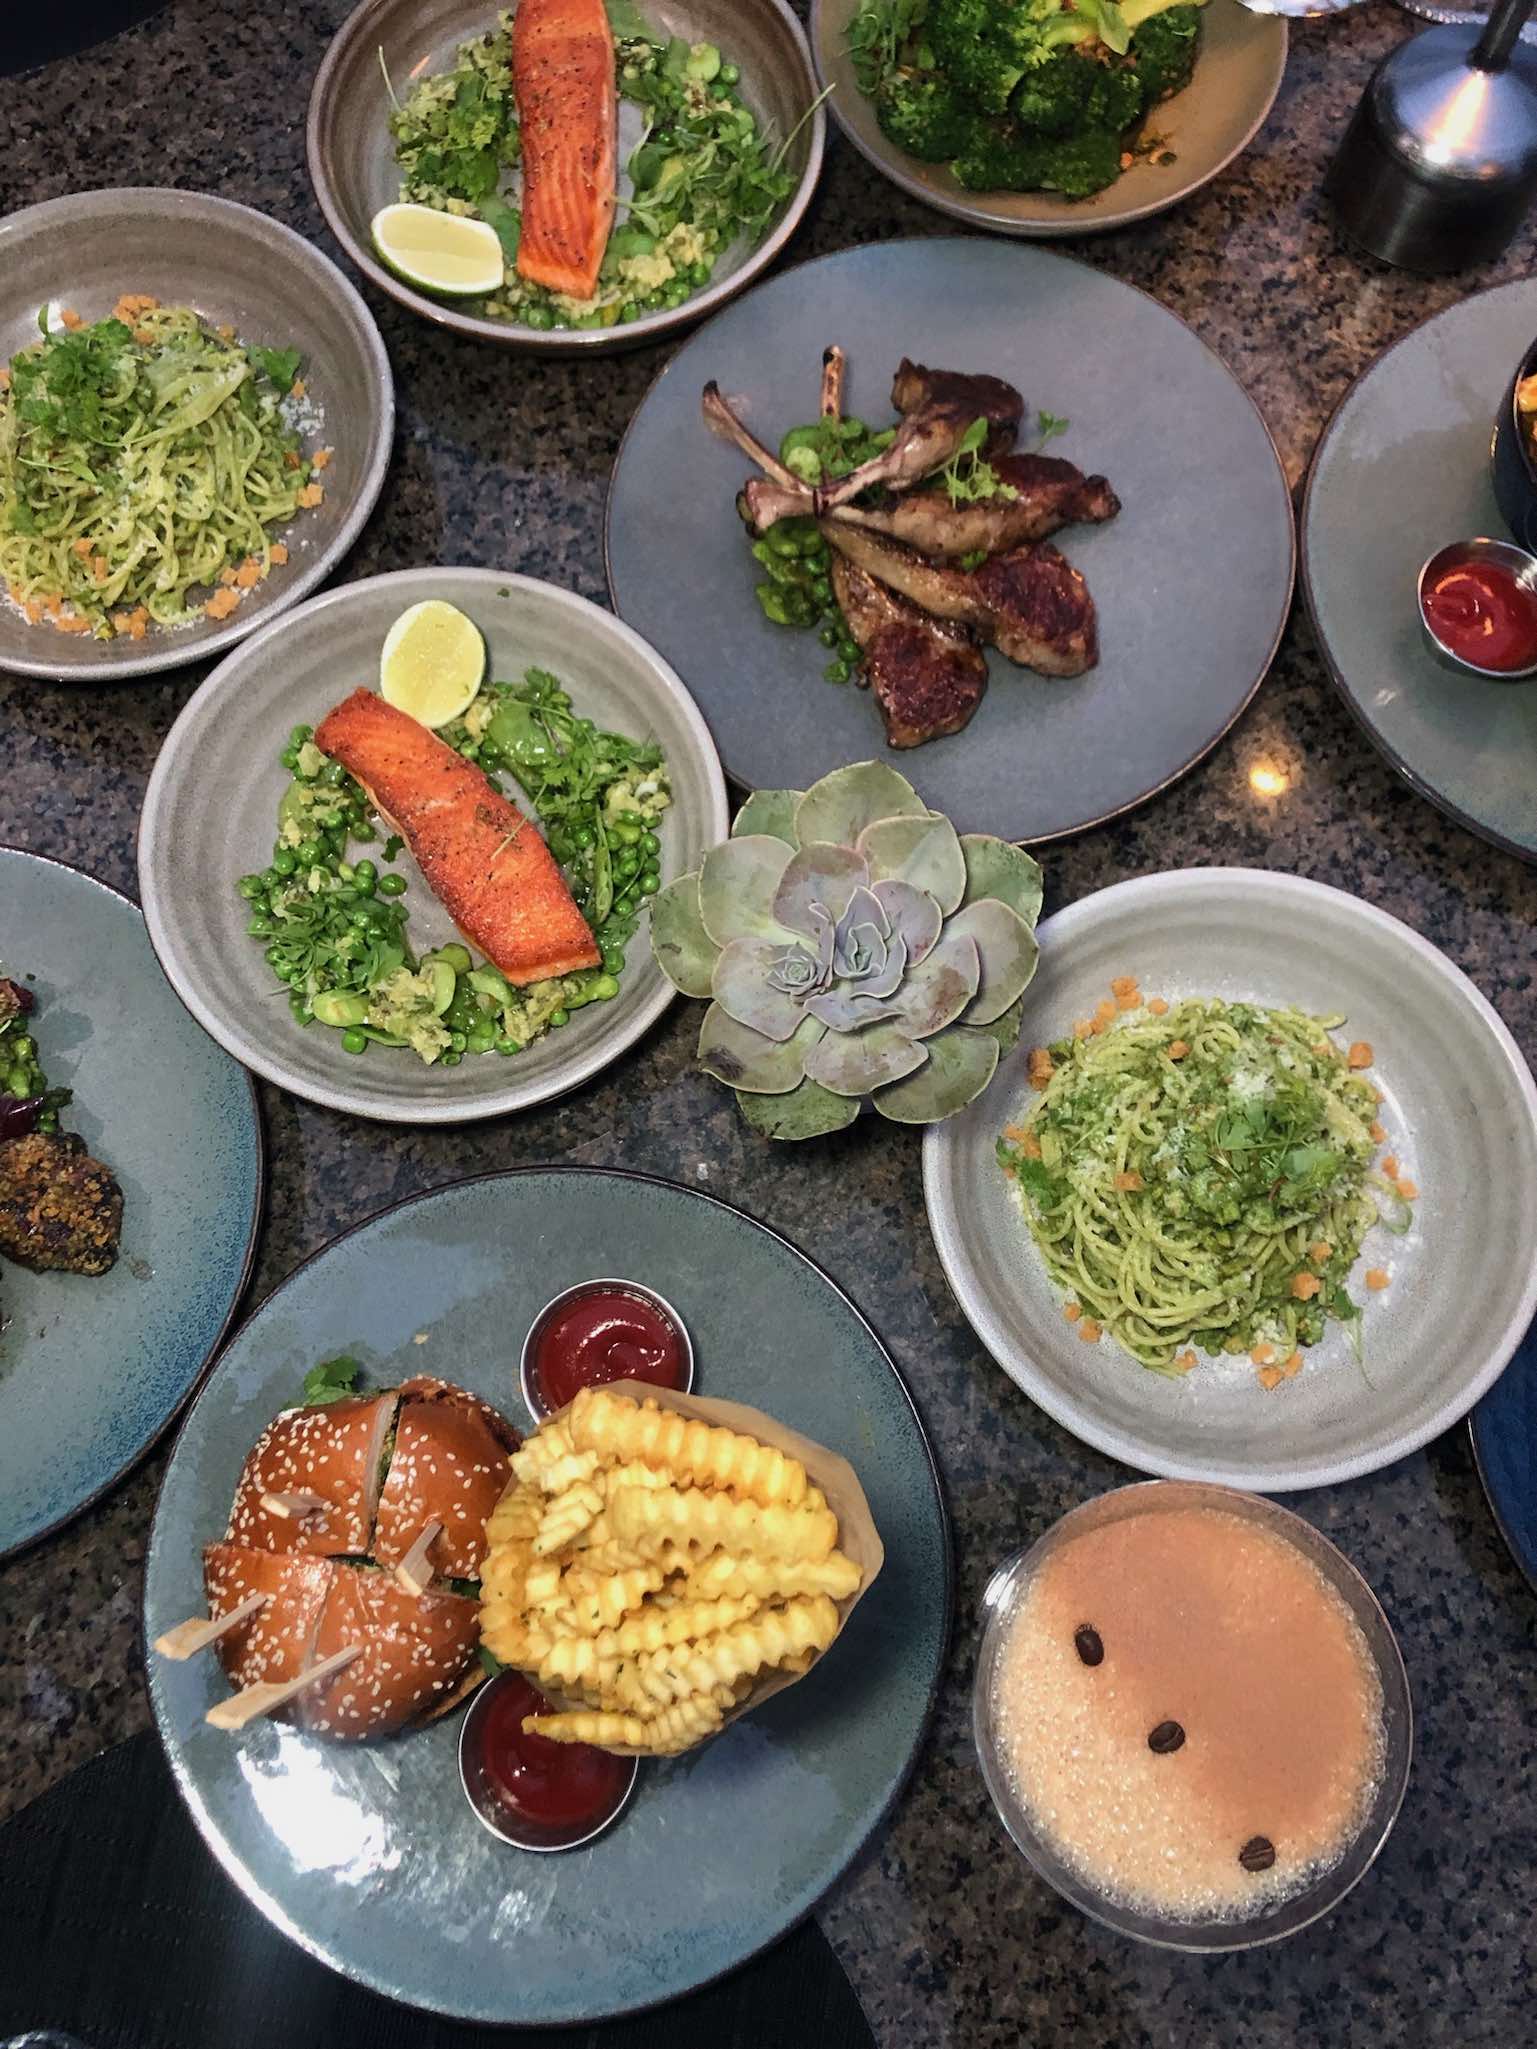 An image of a few of the new items on the new all-day menu at The Rooftop by JG.